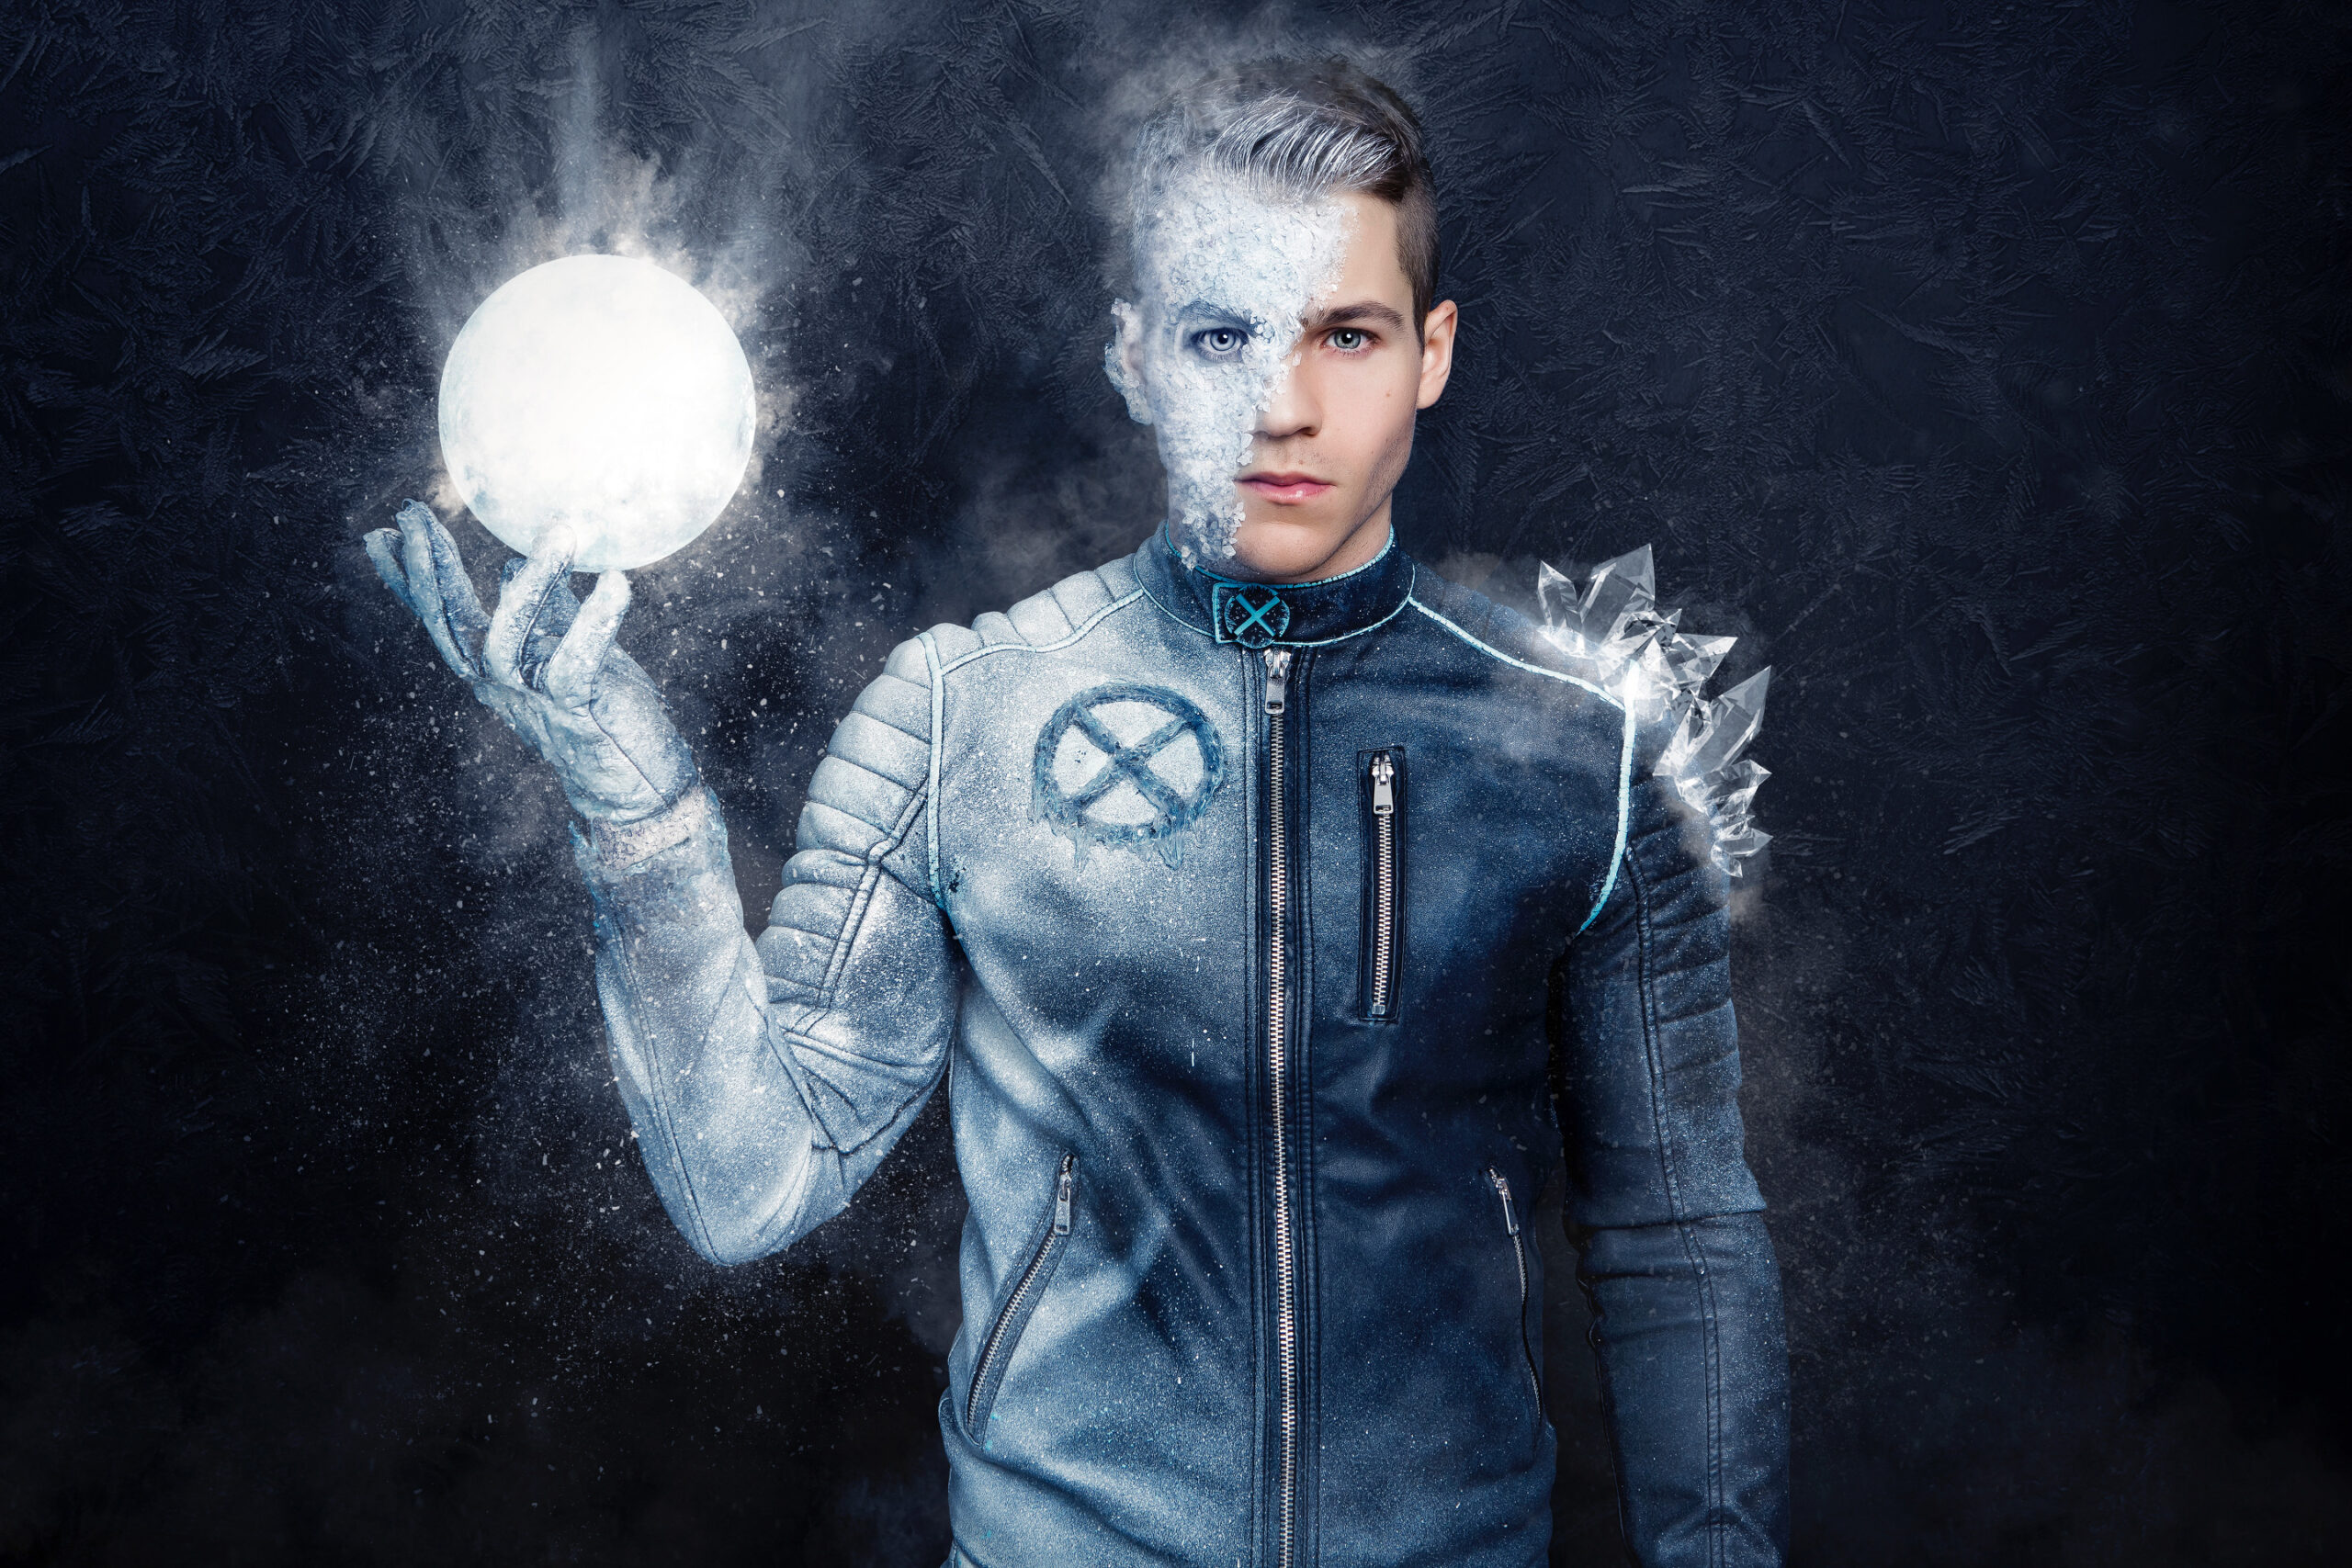 Interview with Cosplayer Michael Hamm